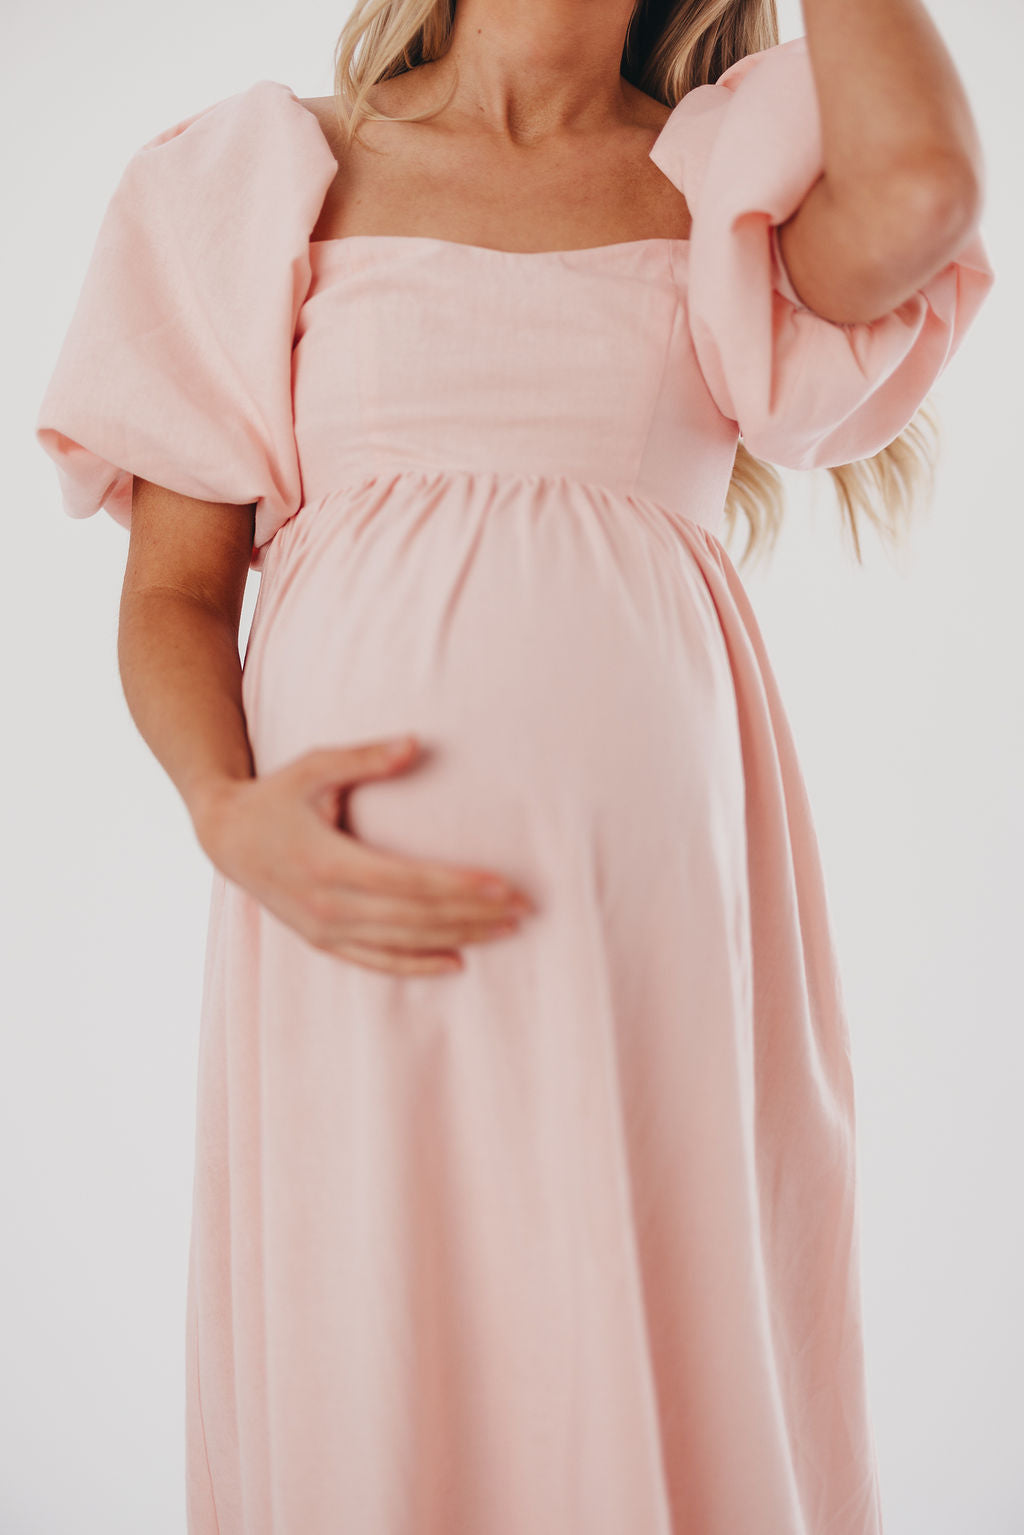 Hamilton Midi Dress in Pink - Bump Friendly (S-XL) - Sign up for Restocks Early May